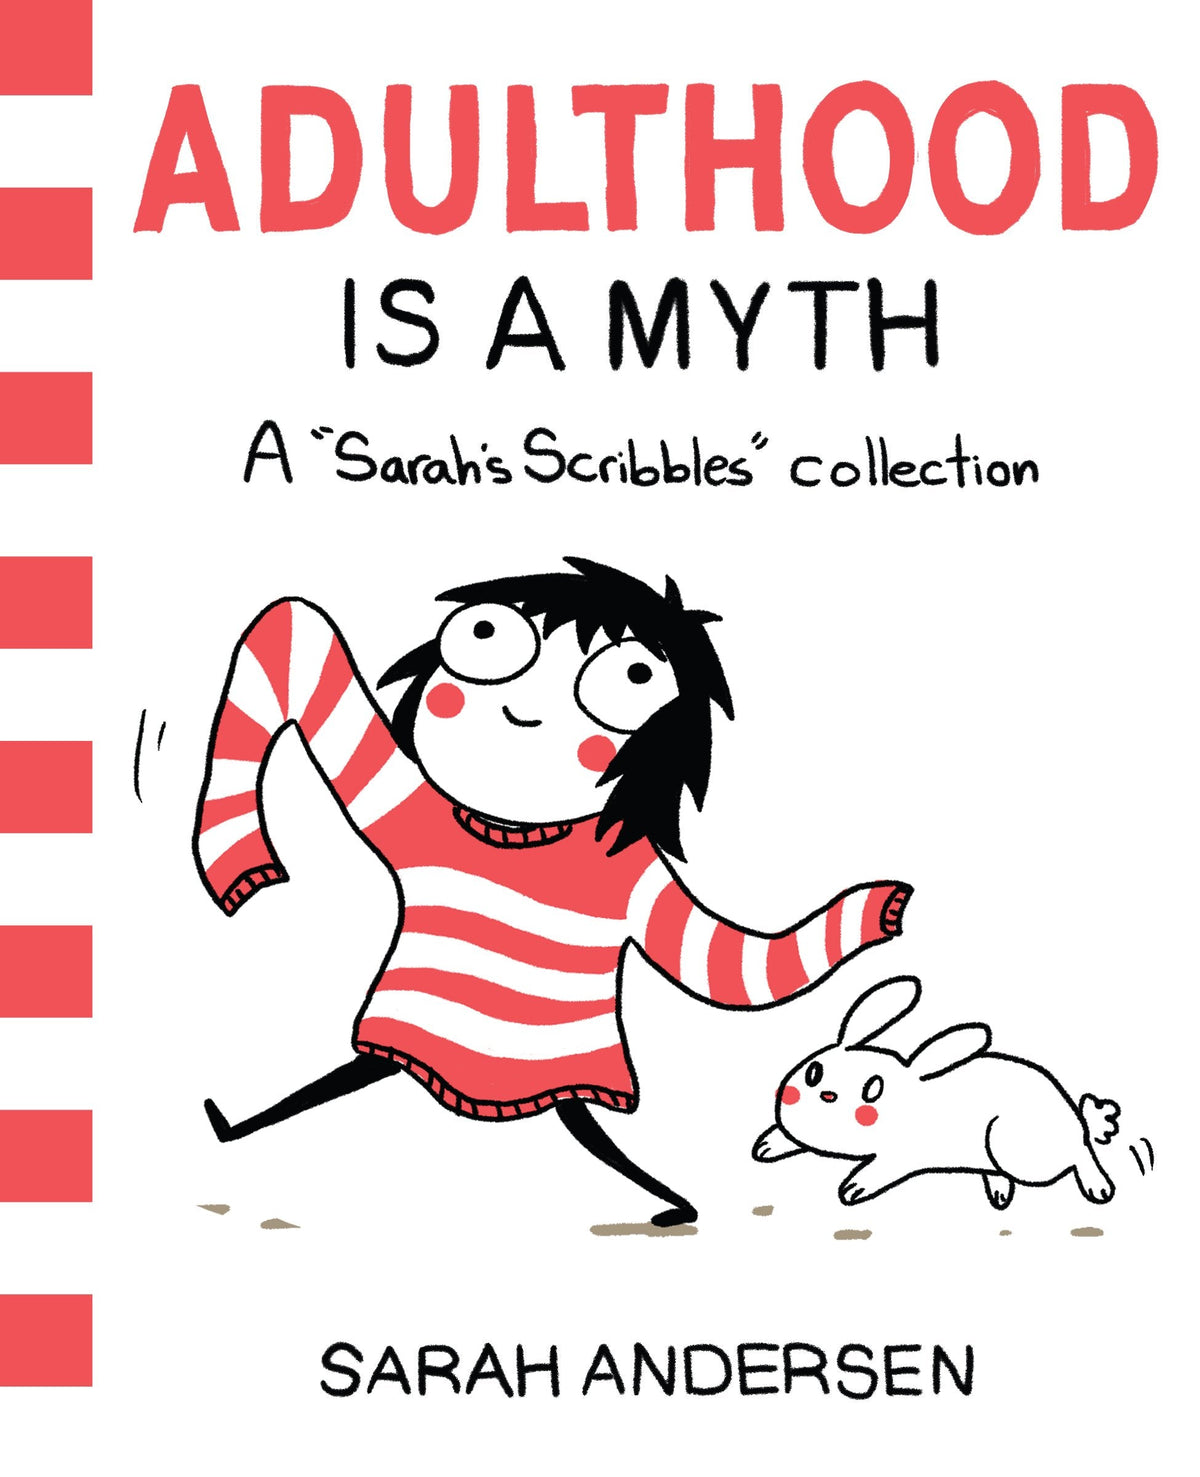 Sarah&#39;s Scribbles: &quot;Adulthood Is A Myth&quot;